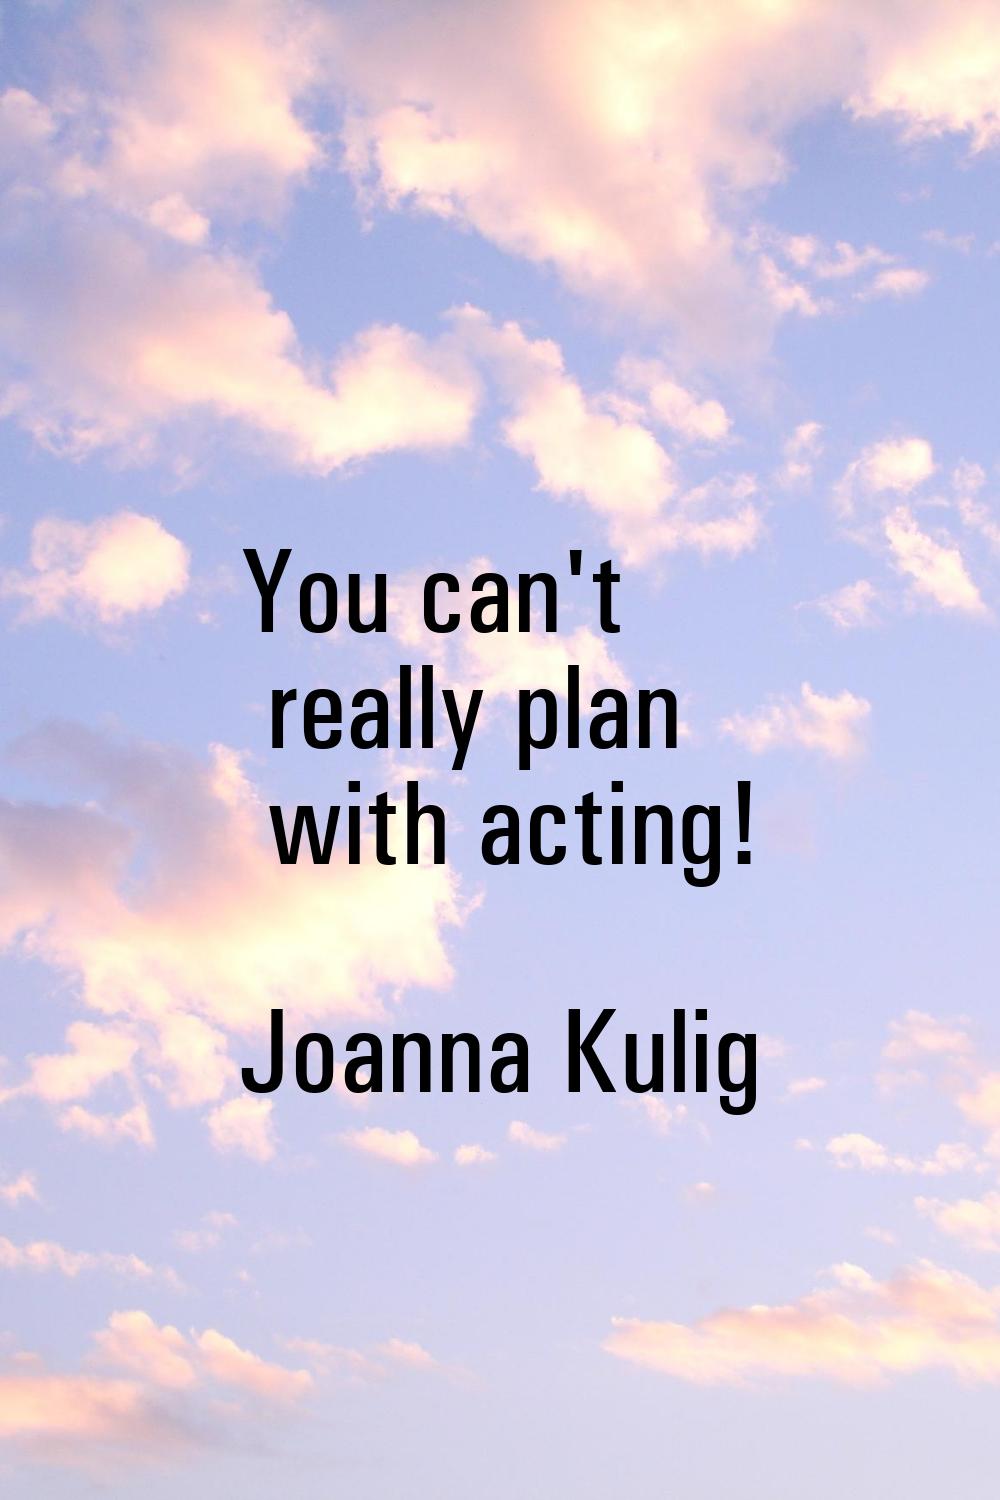 You can't really plan with acting!